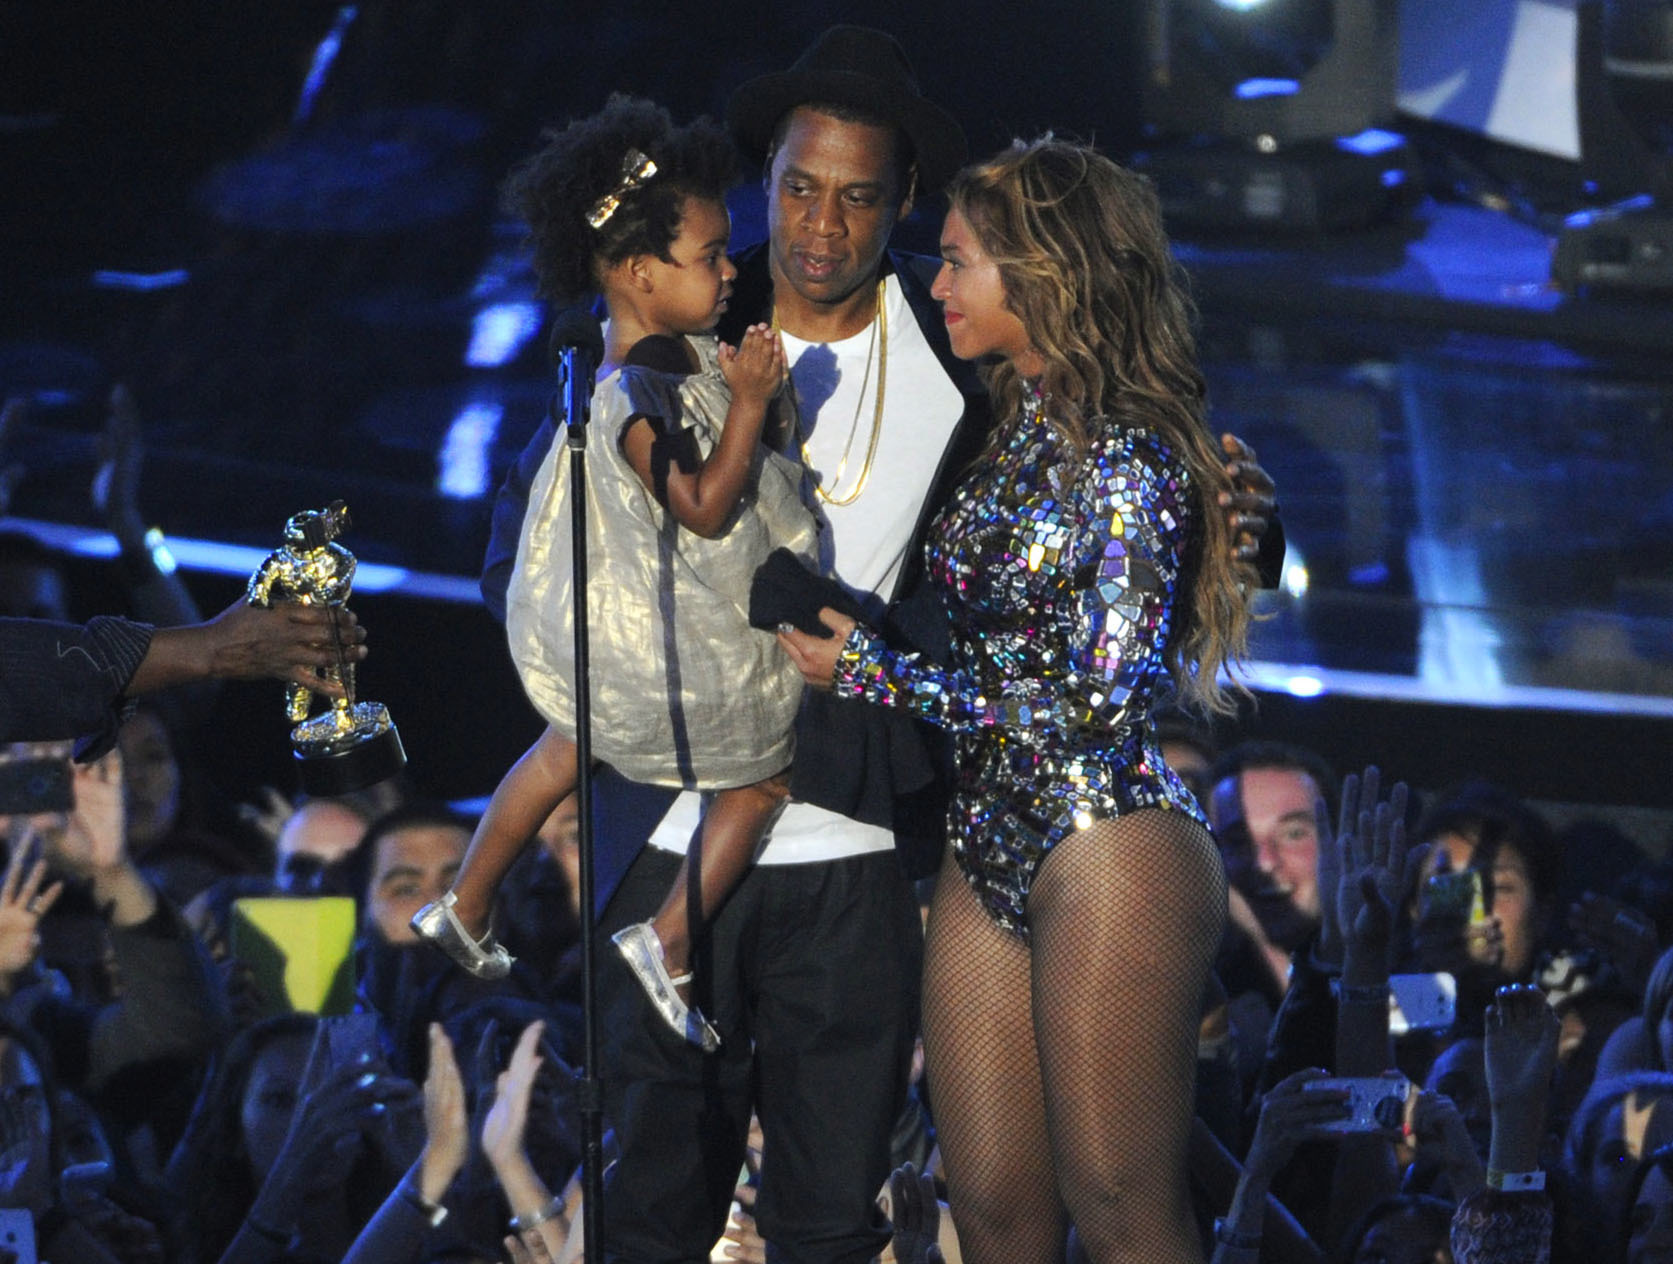 FILE - This Aug 24, 2014 file photo shows Beyonce on stage with Jay Z and their daughter Blue Ivy as she accepts the Video Vanguard Award at the MTV Video Music Awards in Inglewood, Calif. Beyonce announced on her Instagram account, Wednesday, Feb. 1, 2017, that she is expecting twins.